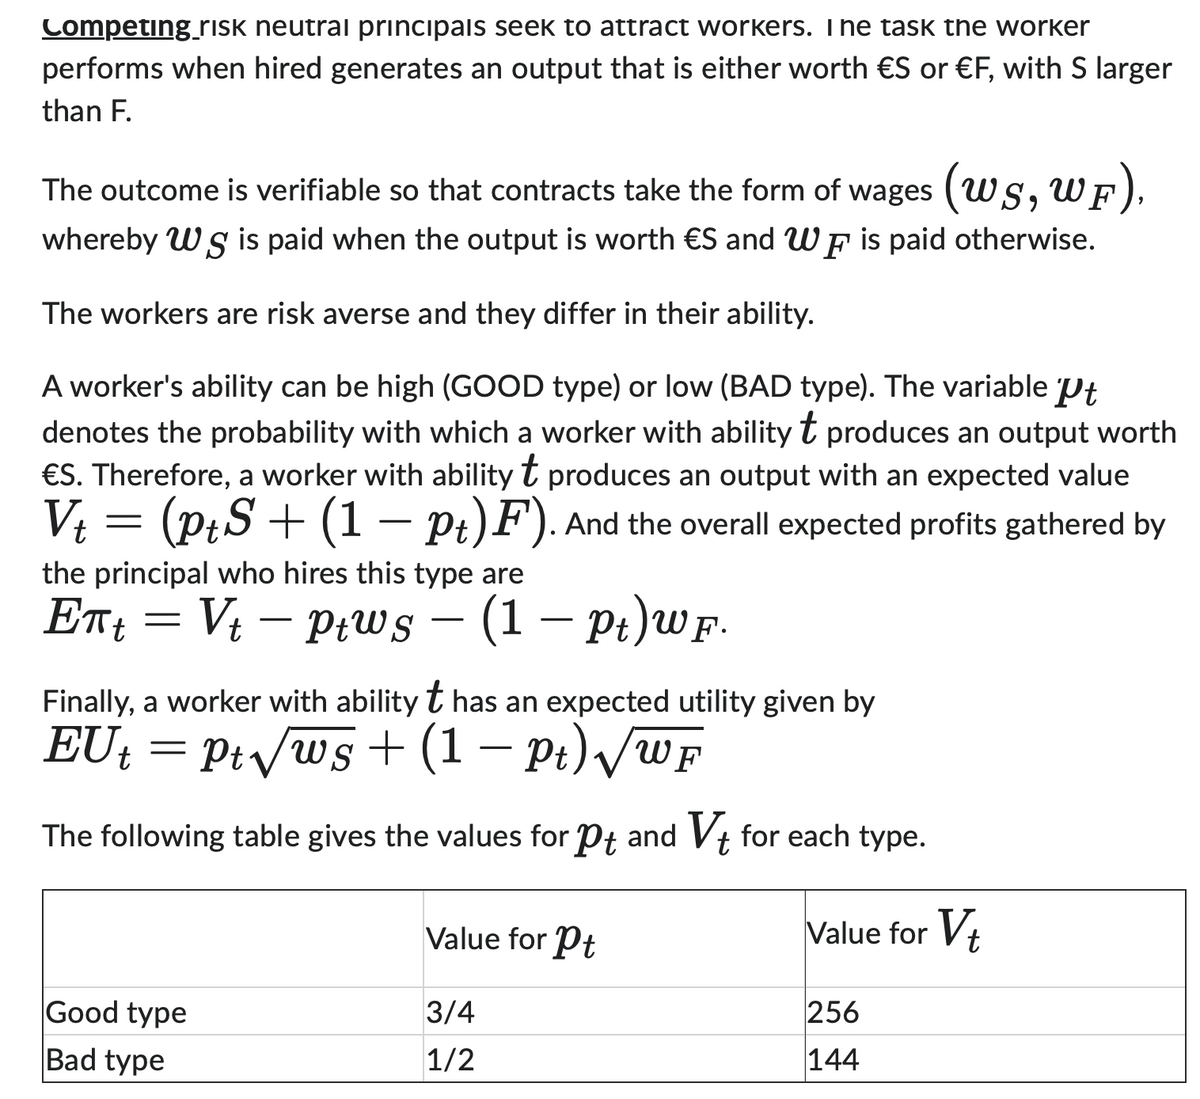 Competing_risk neutral principals seek to attract workers. I he task the worker
performs when hired generates an output that is either worth €S or €F, with S larger
than F.
The outcome is verifiable so that contracts take the form of wages (WS, WF),
whereby Wg is paid when the output is worth €S and WF is paid otherwise.
S
The workers are risk averse and they differ in their ability.
A worker's ability can be high (GOOD type) or low (BAD type). The variable Pt
denotes the probability with which a worker with ability produces an output worth
t
€S. Therefore, a worker with ability t produces an output with an expected value
Vt = (ptS+ (1 - pt)F). And the overall expected profits gathered by
the principal who hires this type are
Ent = -
Vt ptws (1 — pt)wF.
Finally, a worker with ability t has an expected utility given by
EUt = Pt√√ws + (1 − Pt) √/wF
The following table gives the values for Pt and Vt for each type.
Value for Vt
Good type
Bad type
Value for Pt
3/4
1/2
256
144